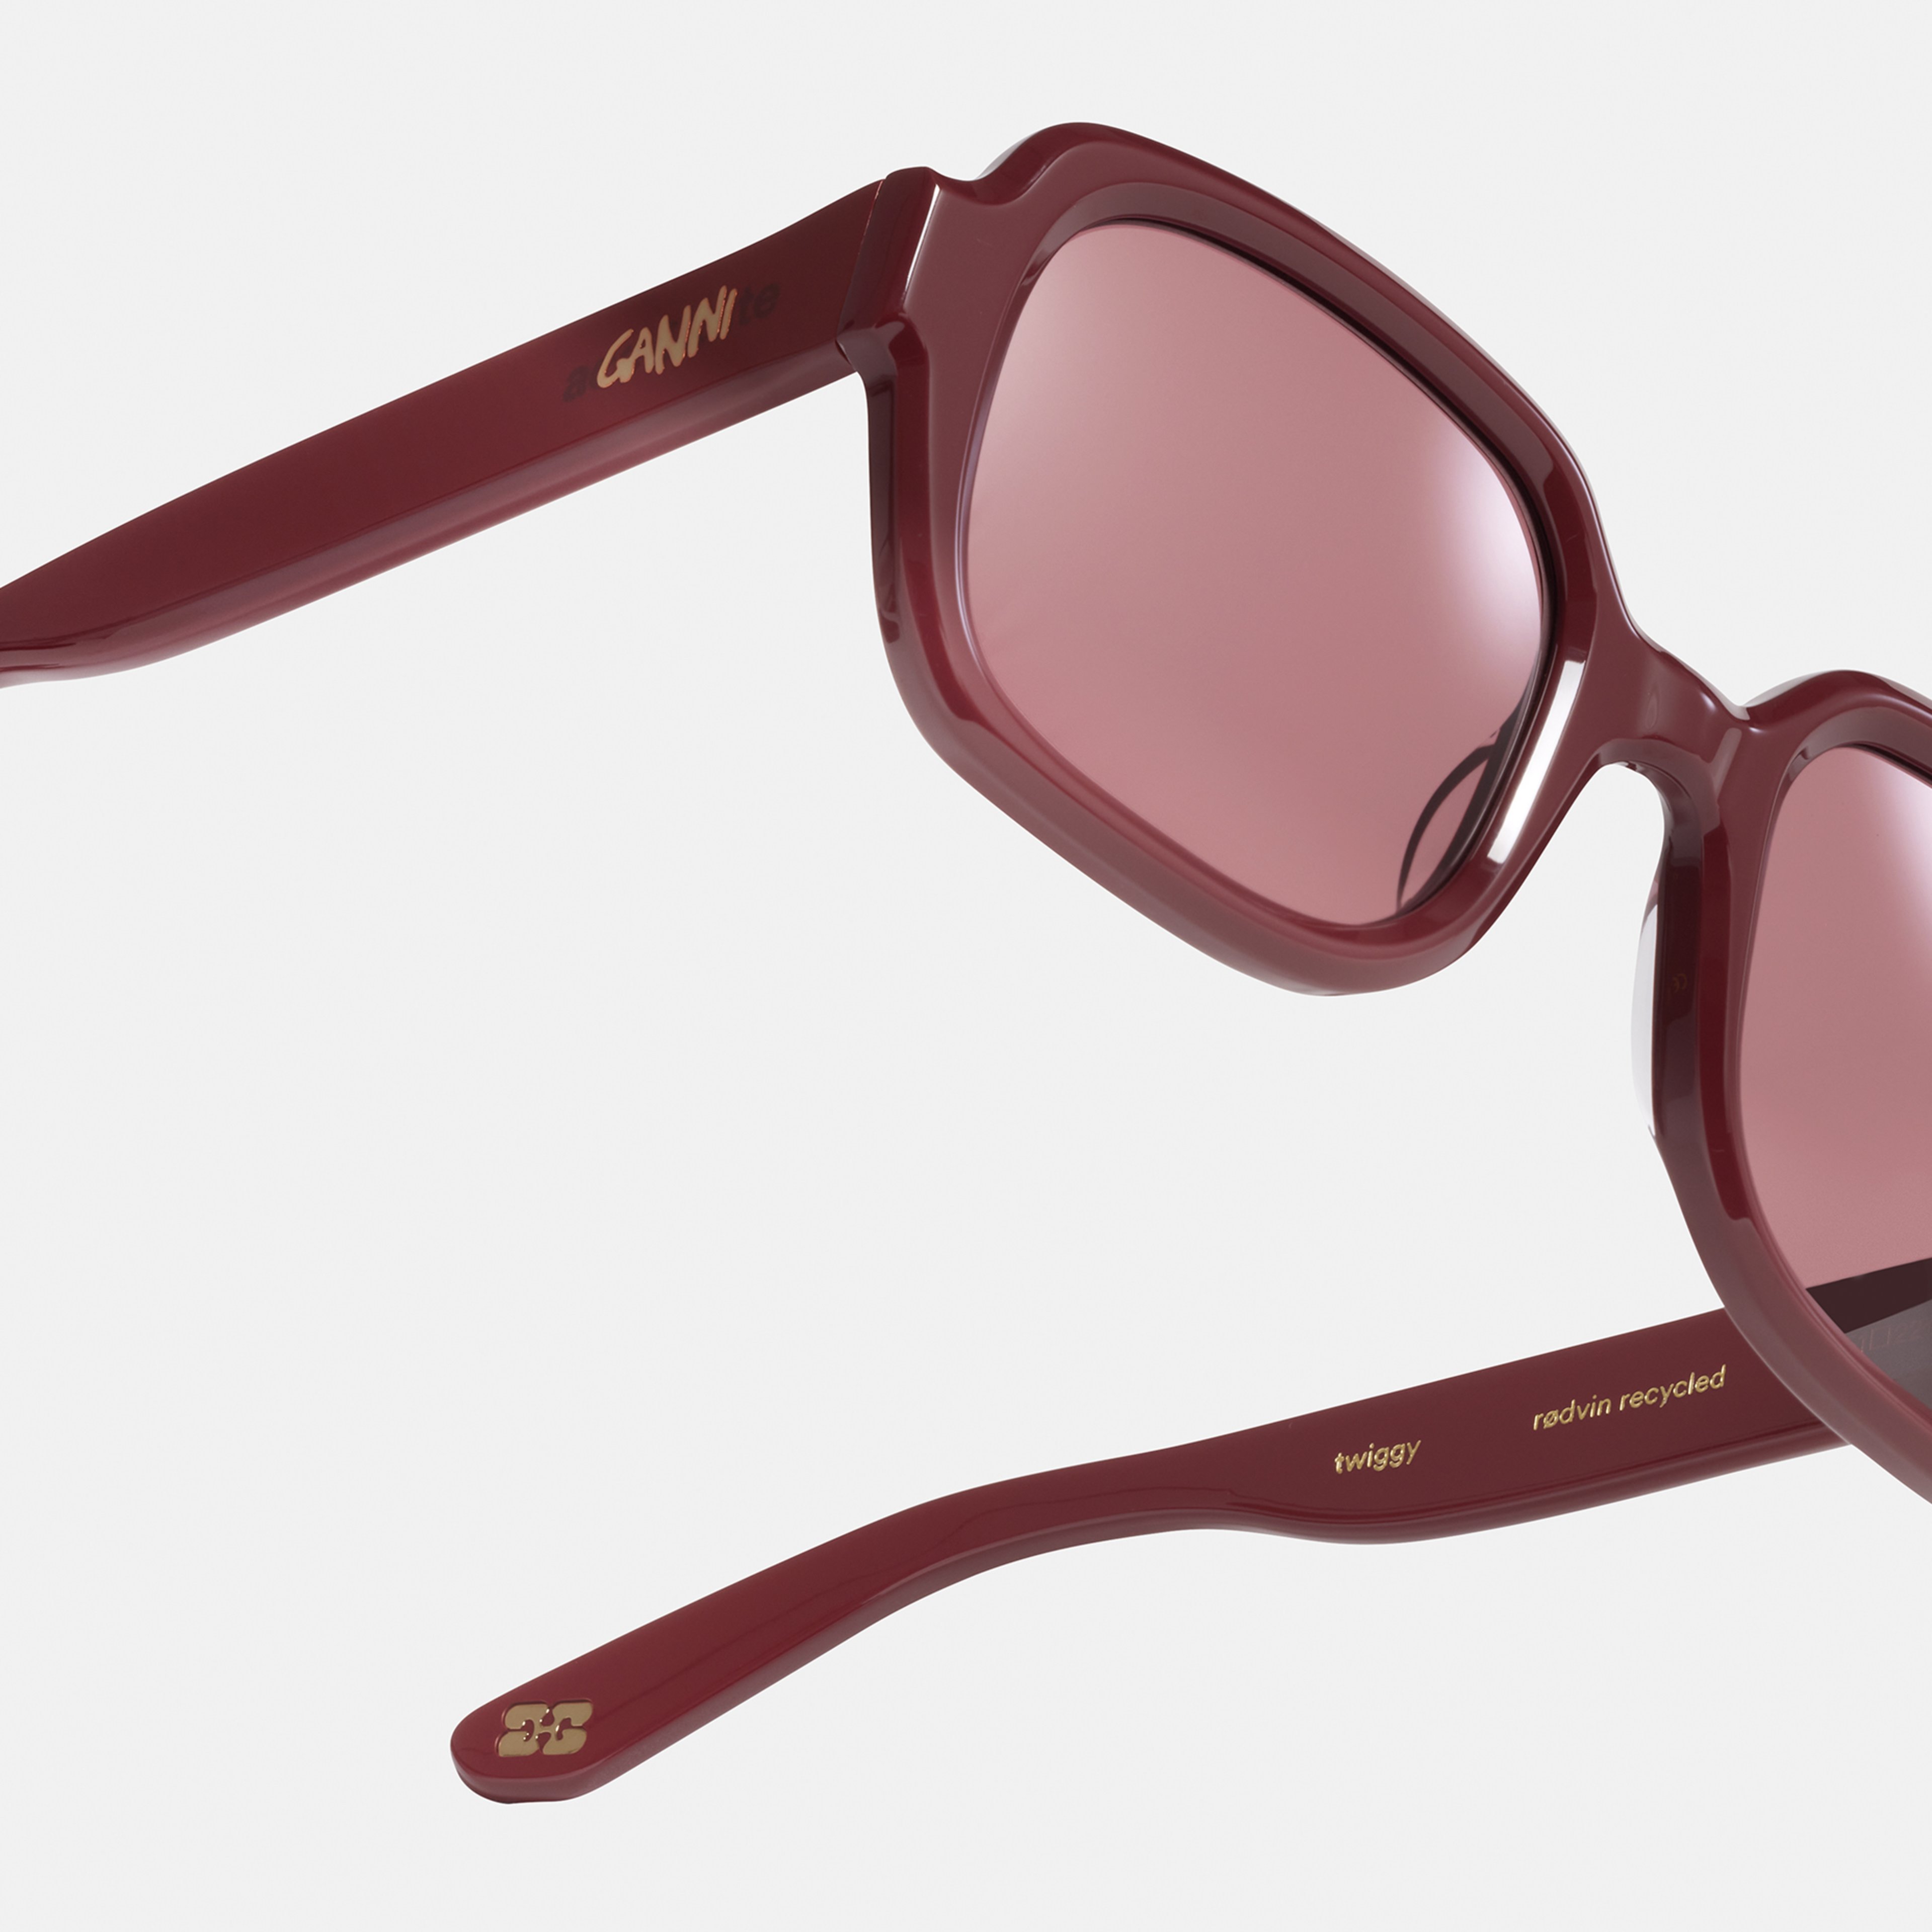 Ace & Tate Solaires | carrée Acétate in Violet, Rouge